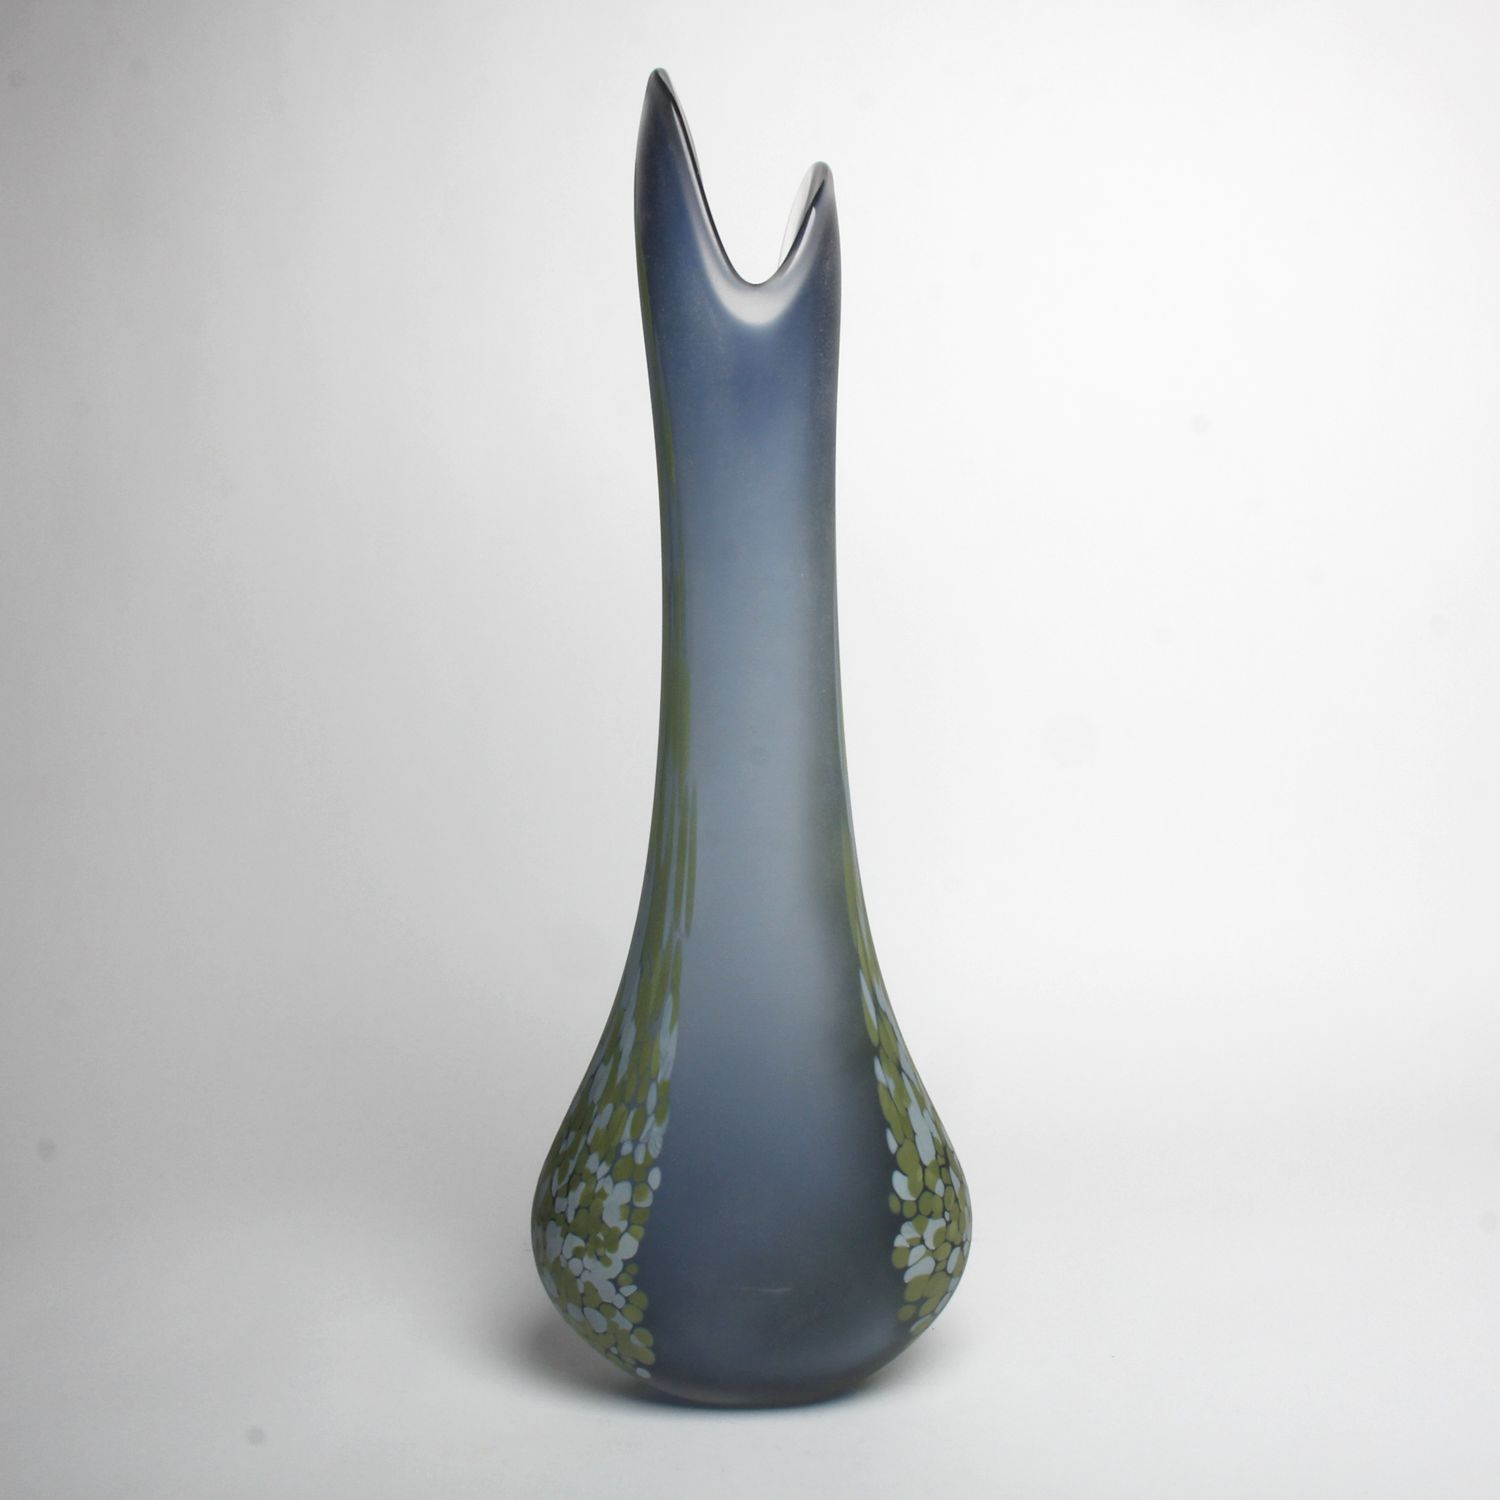 A&M Waddell Hunter: Large Flava Vase Product Image 1 of 3